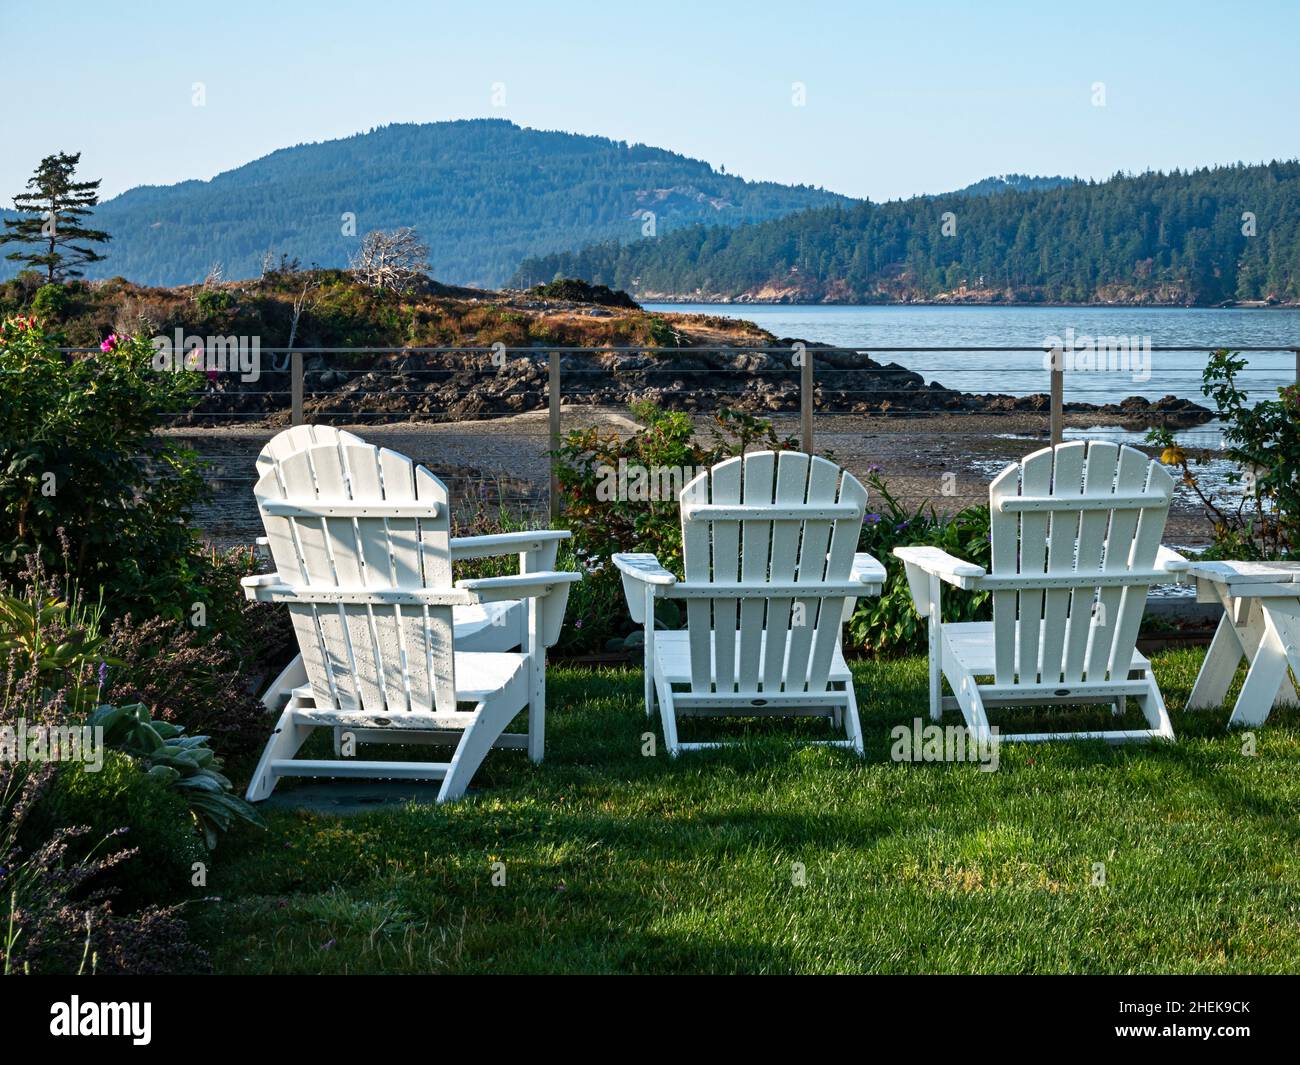 WA21066-00...WASHINGTON - Chairs overlooking the East Sound and Turtleback Mountain from the town of Eastsound on Orcas Island. Stock Photo